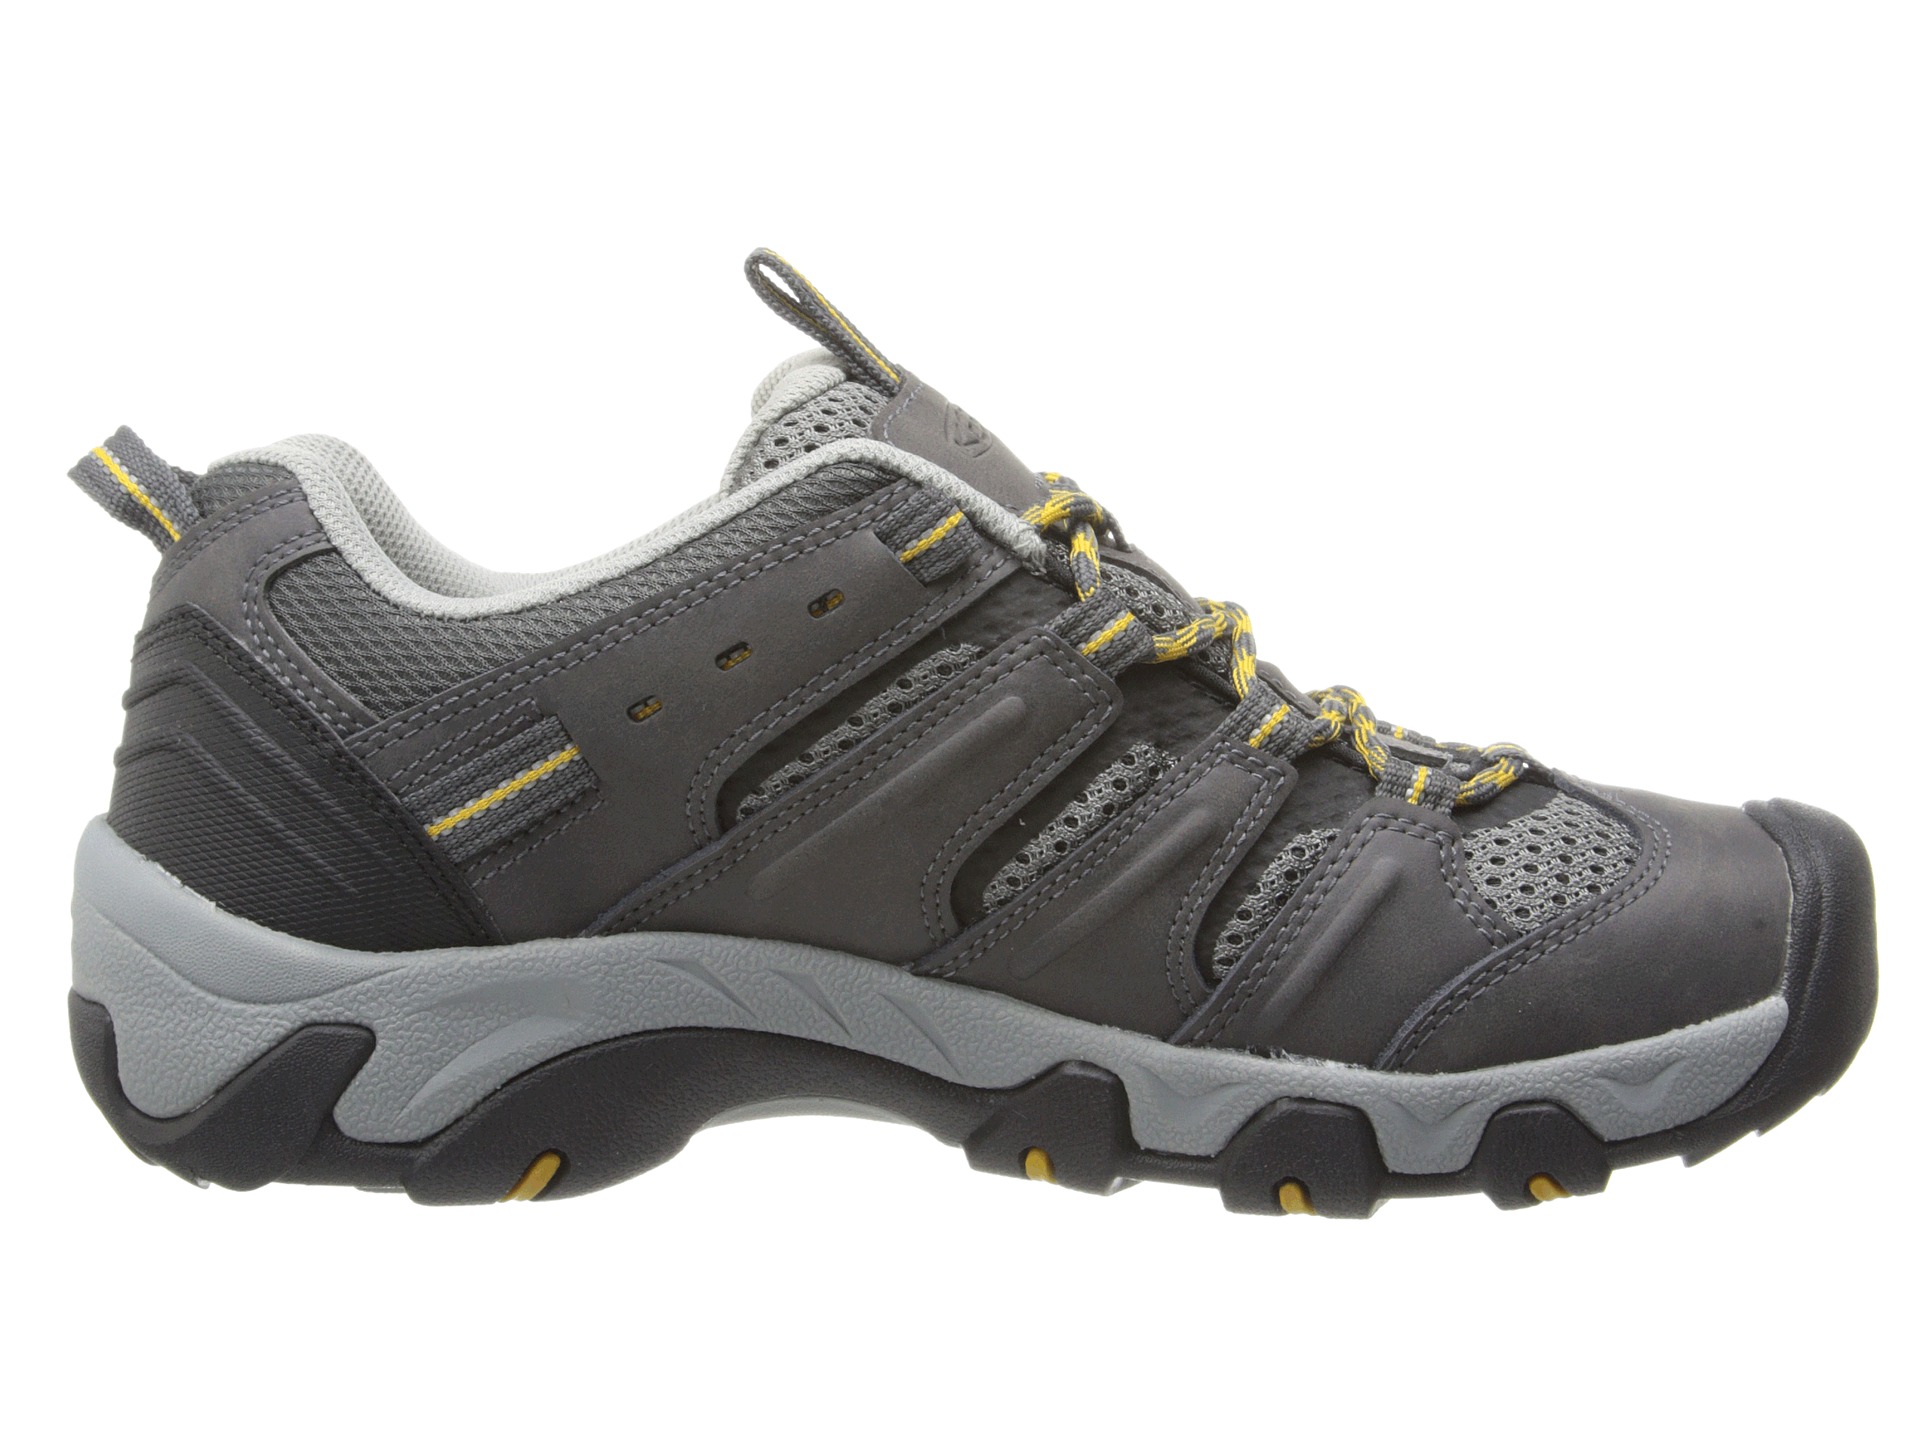 Keen Koven Magnet/Tawny Olive - Zappos.com Free Shipping BOTH Ways